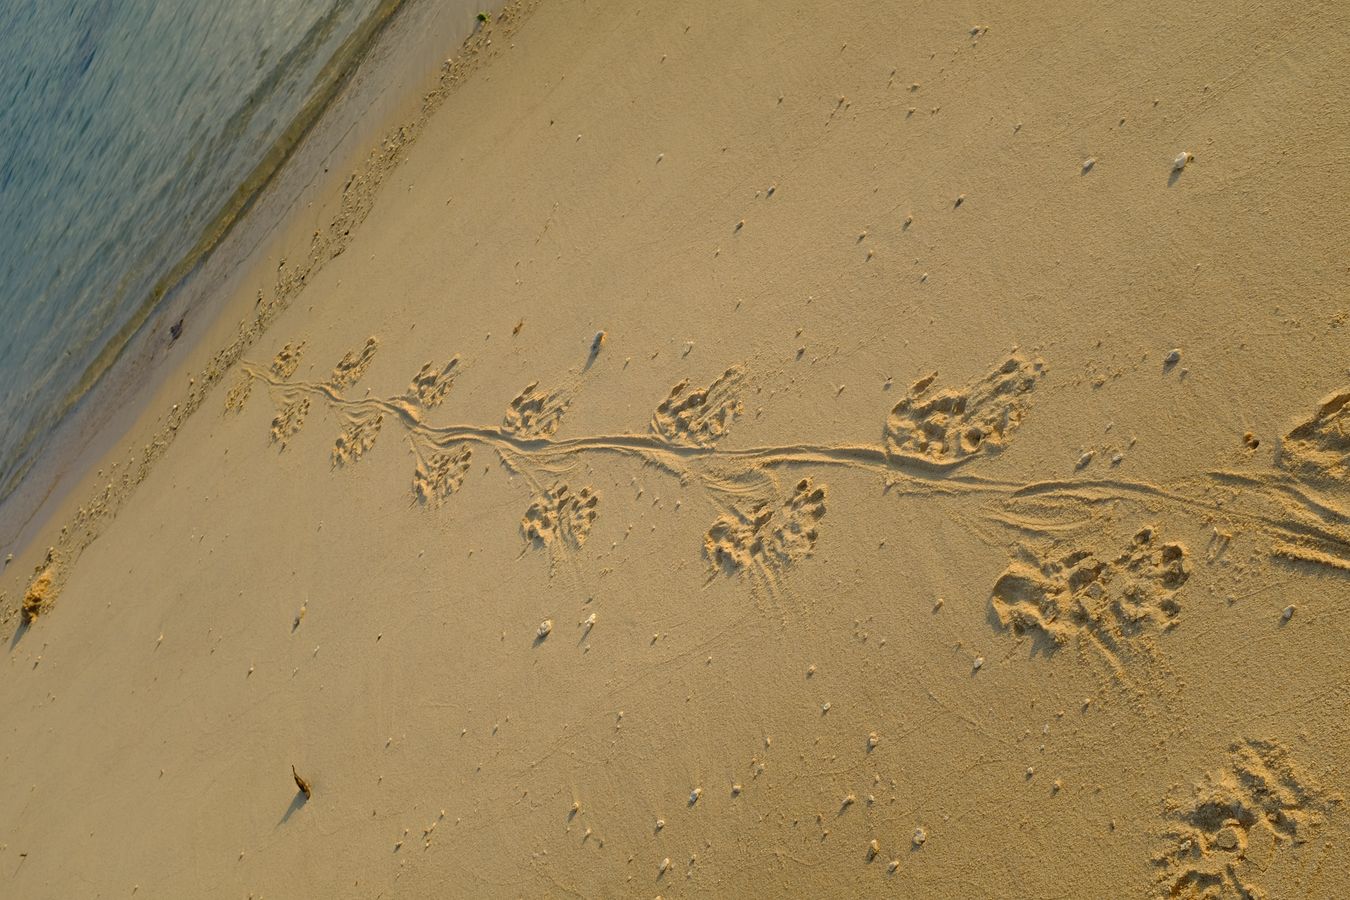 Tracks of water monitor lizard coming from the ocean towards the beach.